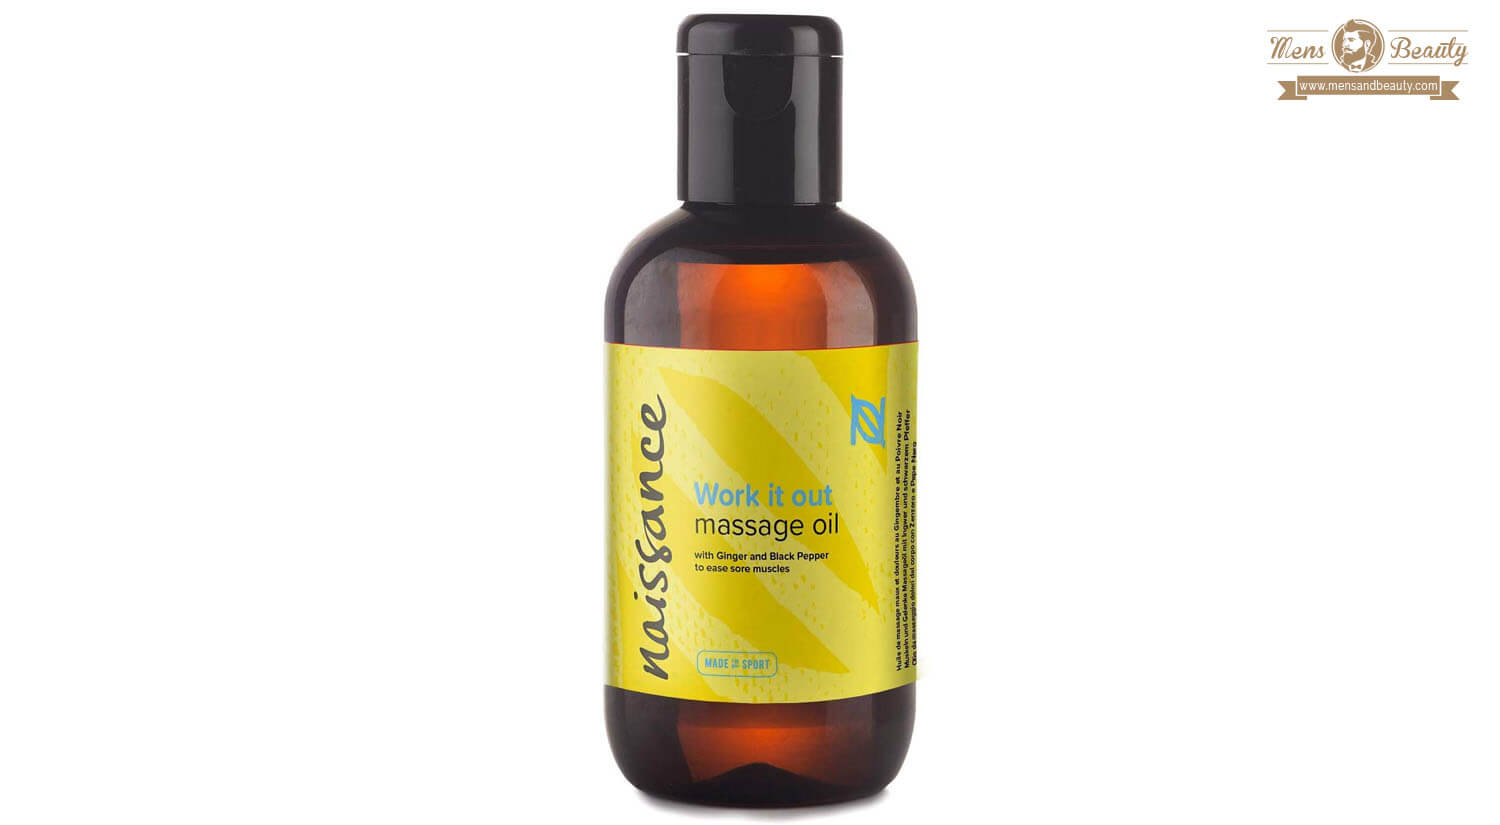 mejores aceites masaje corporal erotico lubricantes intimos naissance work it out